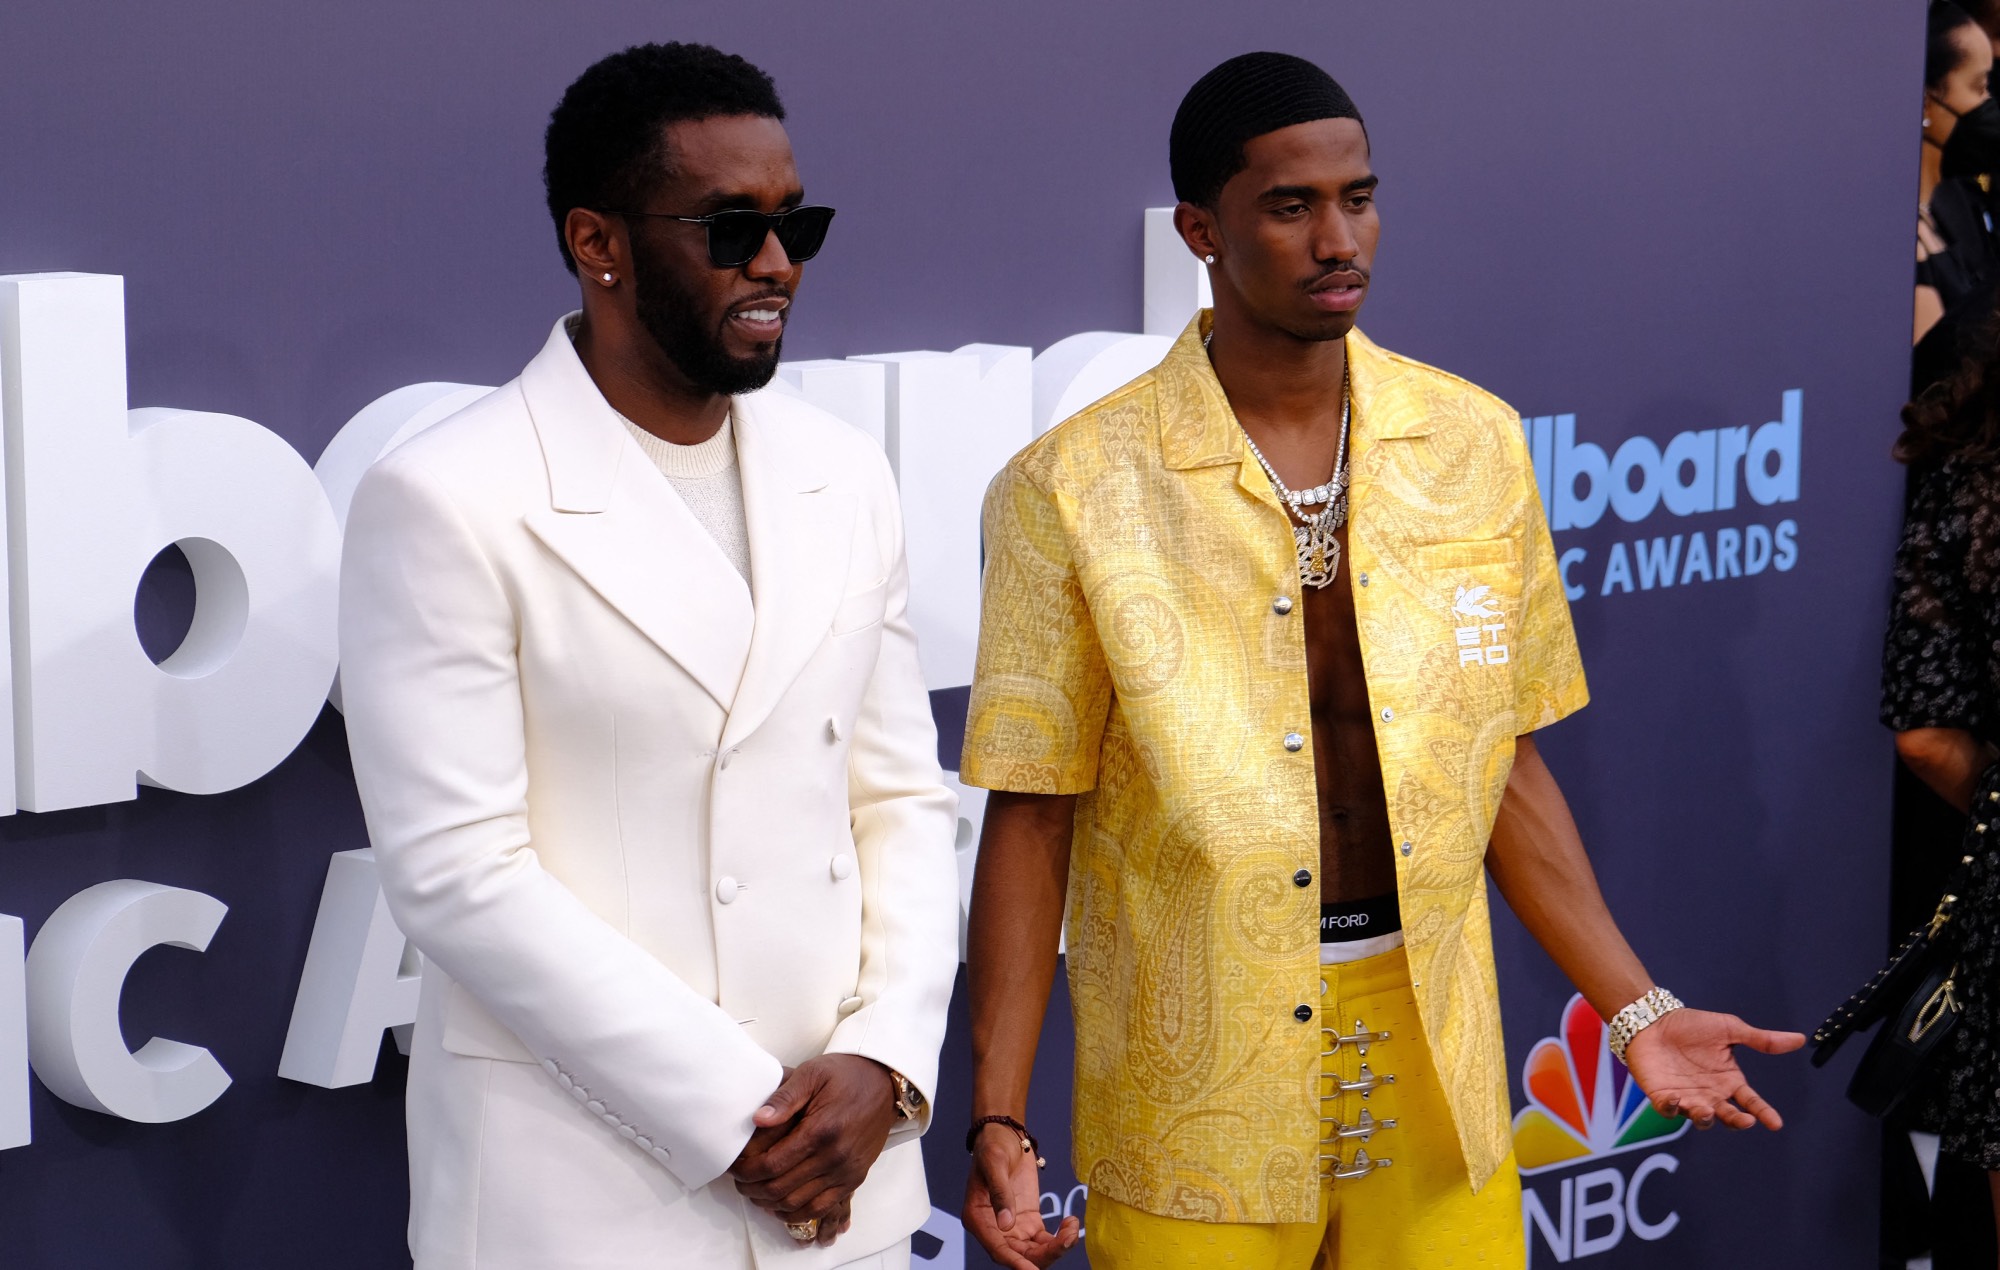 Diddy’s son accused of sexual assault in new lawsuit